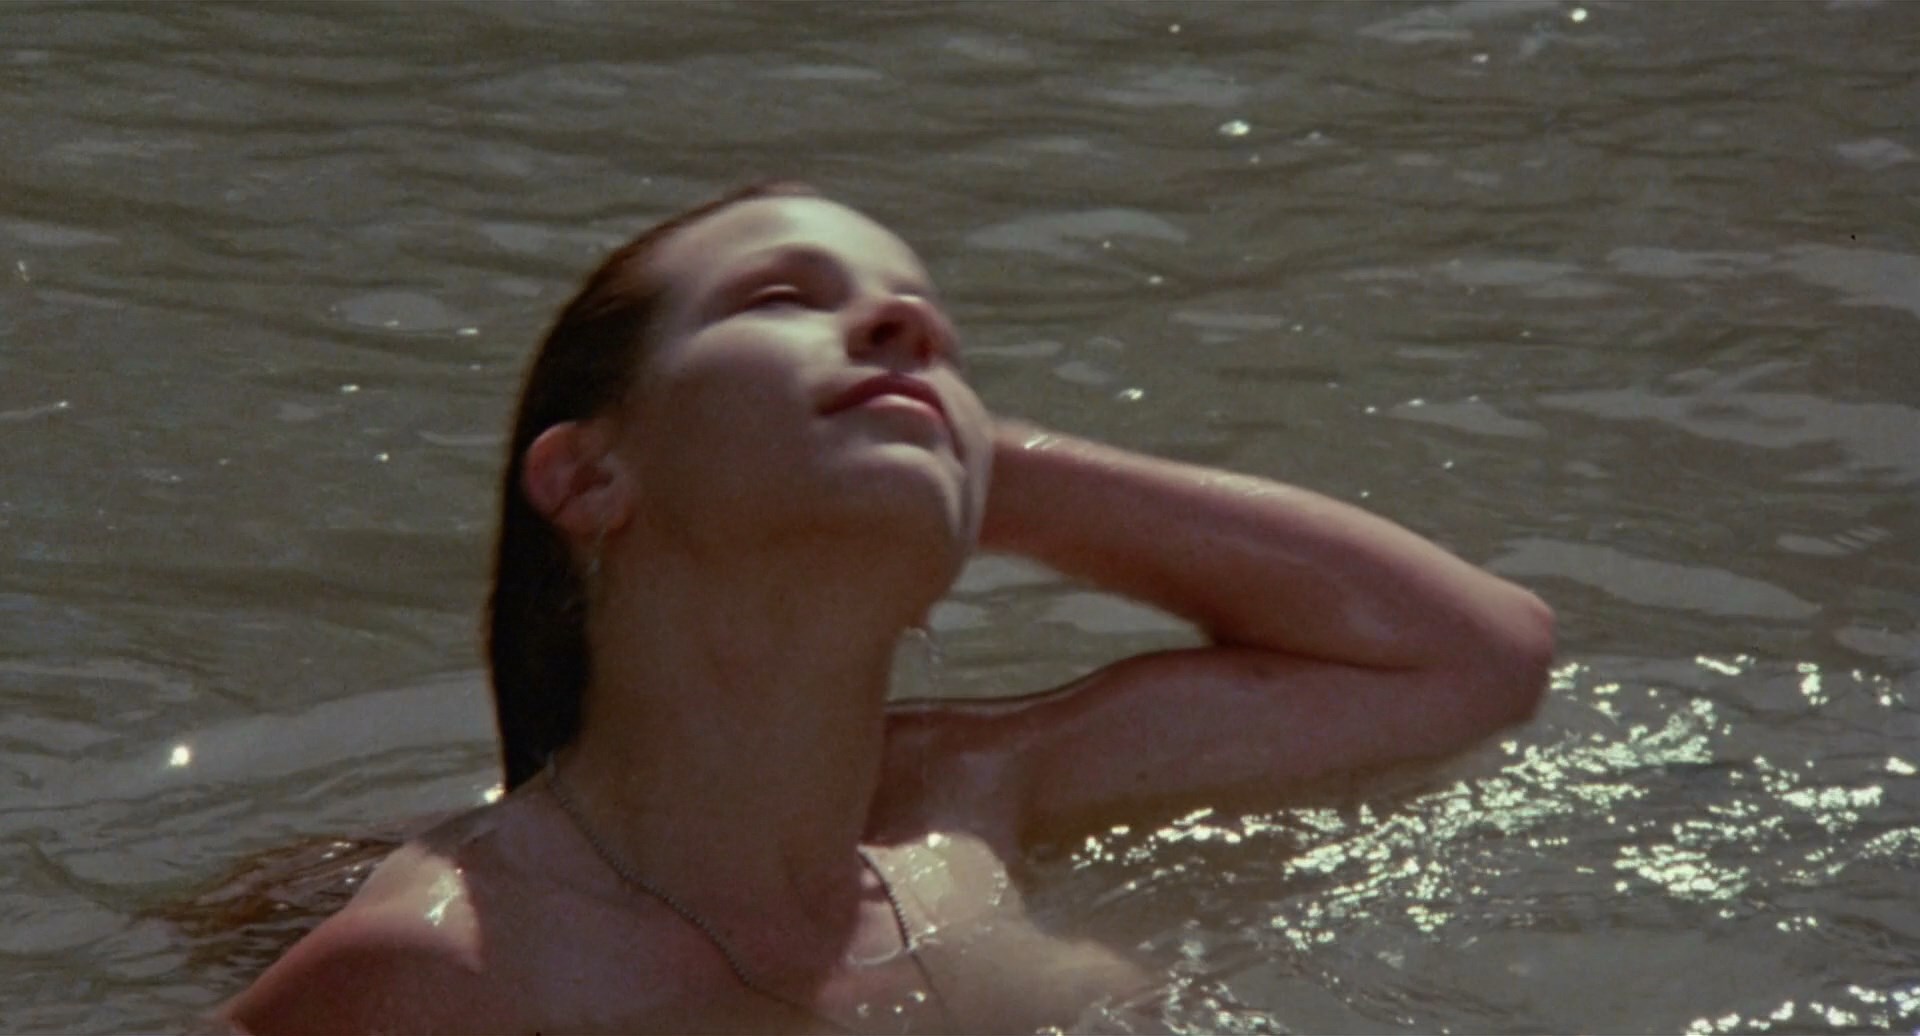 Lili Taylor is swimming topless while two dudes ogle her.